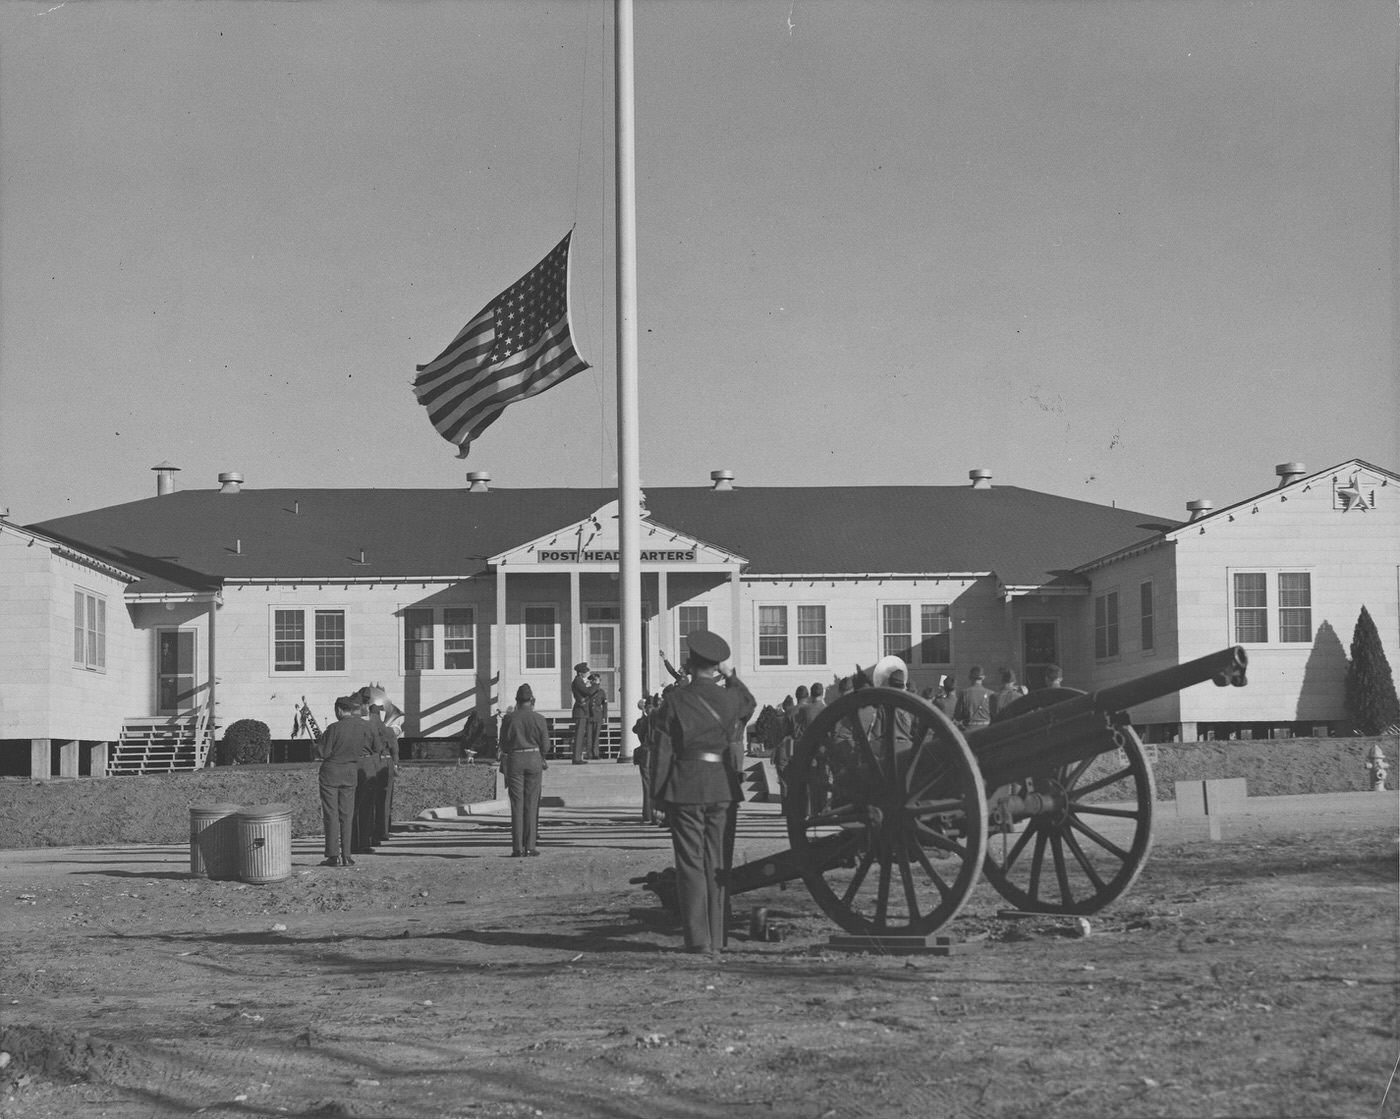 Soldiers fire a cannon during lowering of an American flag in front of the post headquarters building, Tarrant Army Air Field (later renamed Carswell Air Force Base), Fort Worth, Texas, 1943